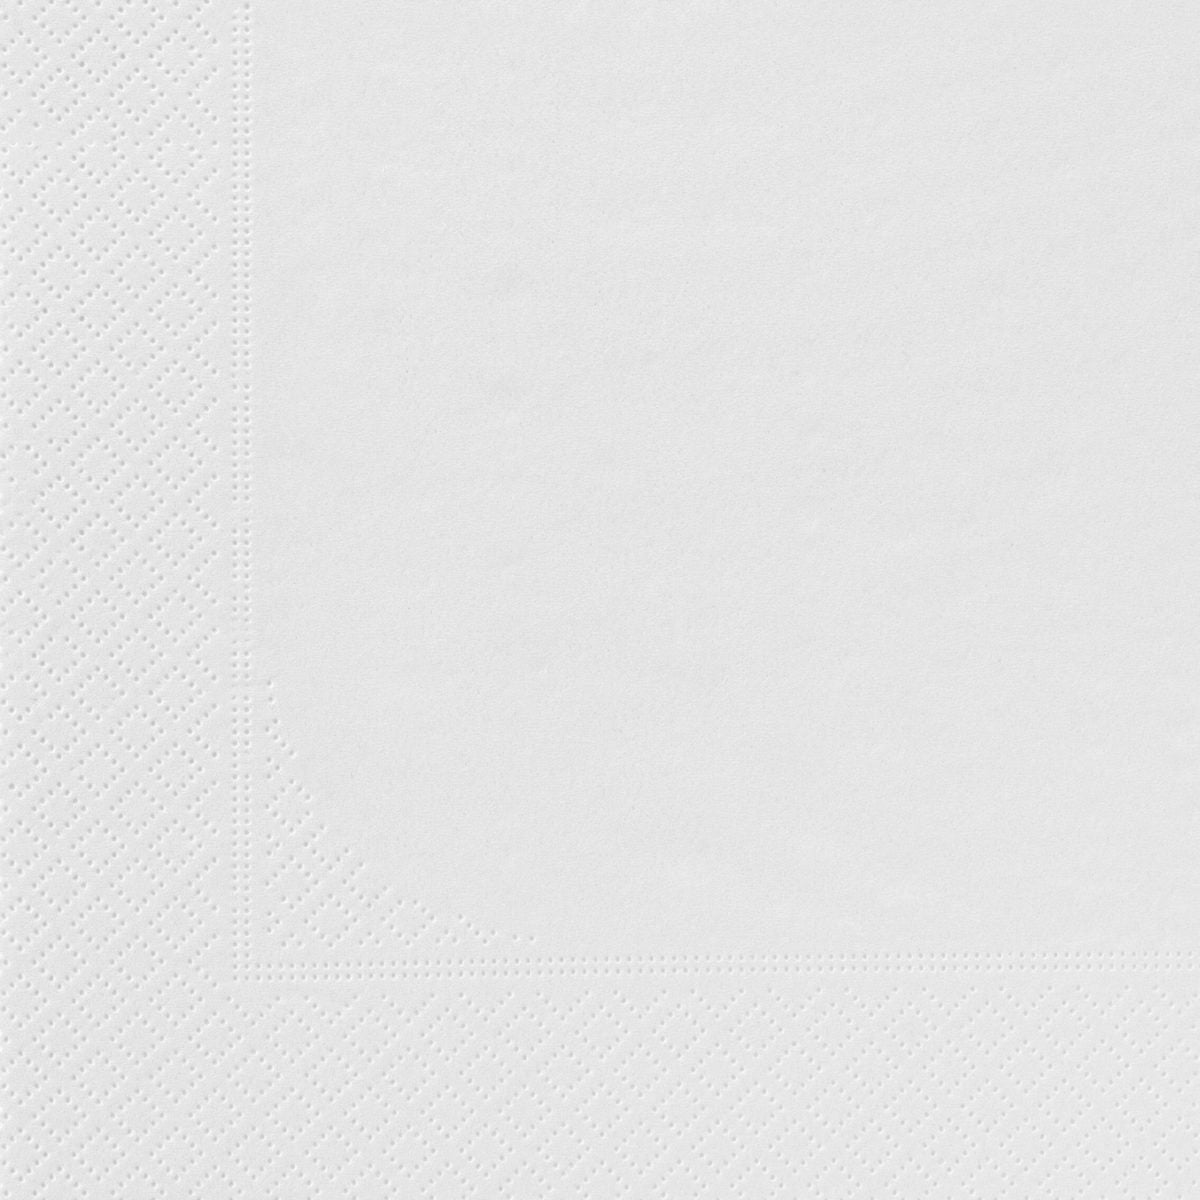 SERVIETTES OUATE 1 FEUILLE - BLANC - 30X30 PLIAGE DECALE